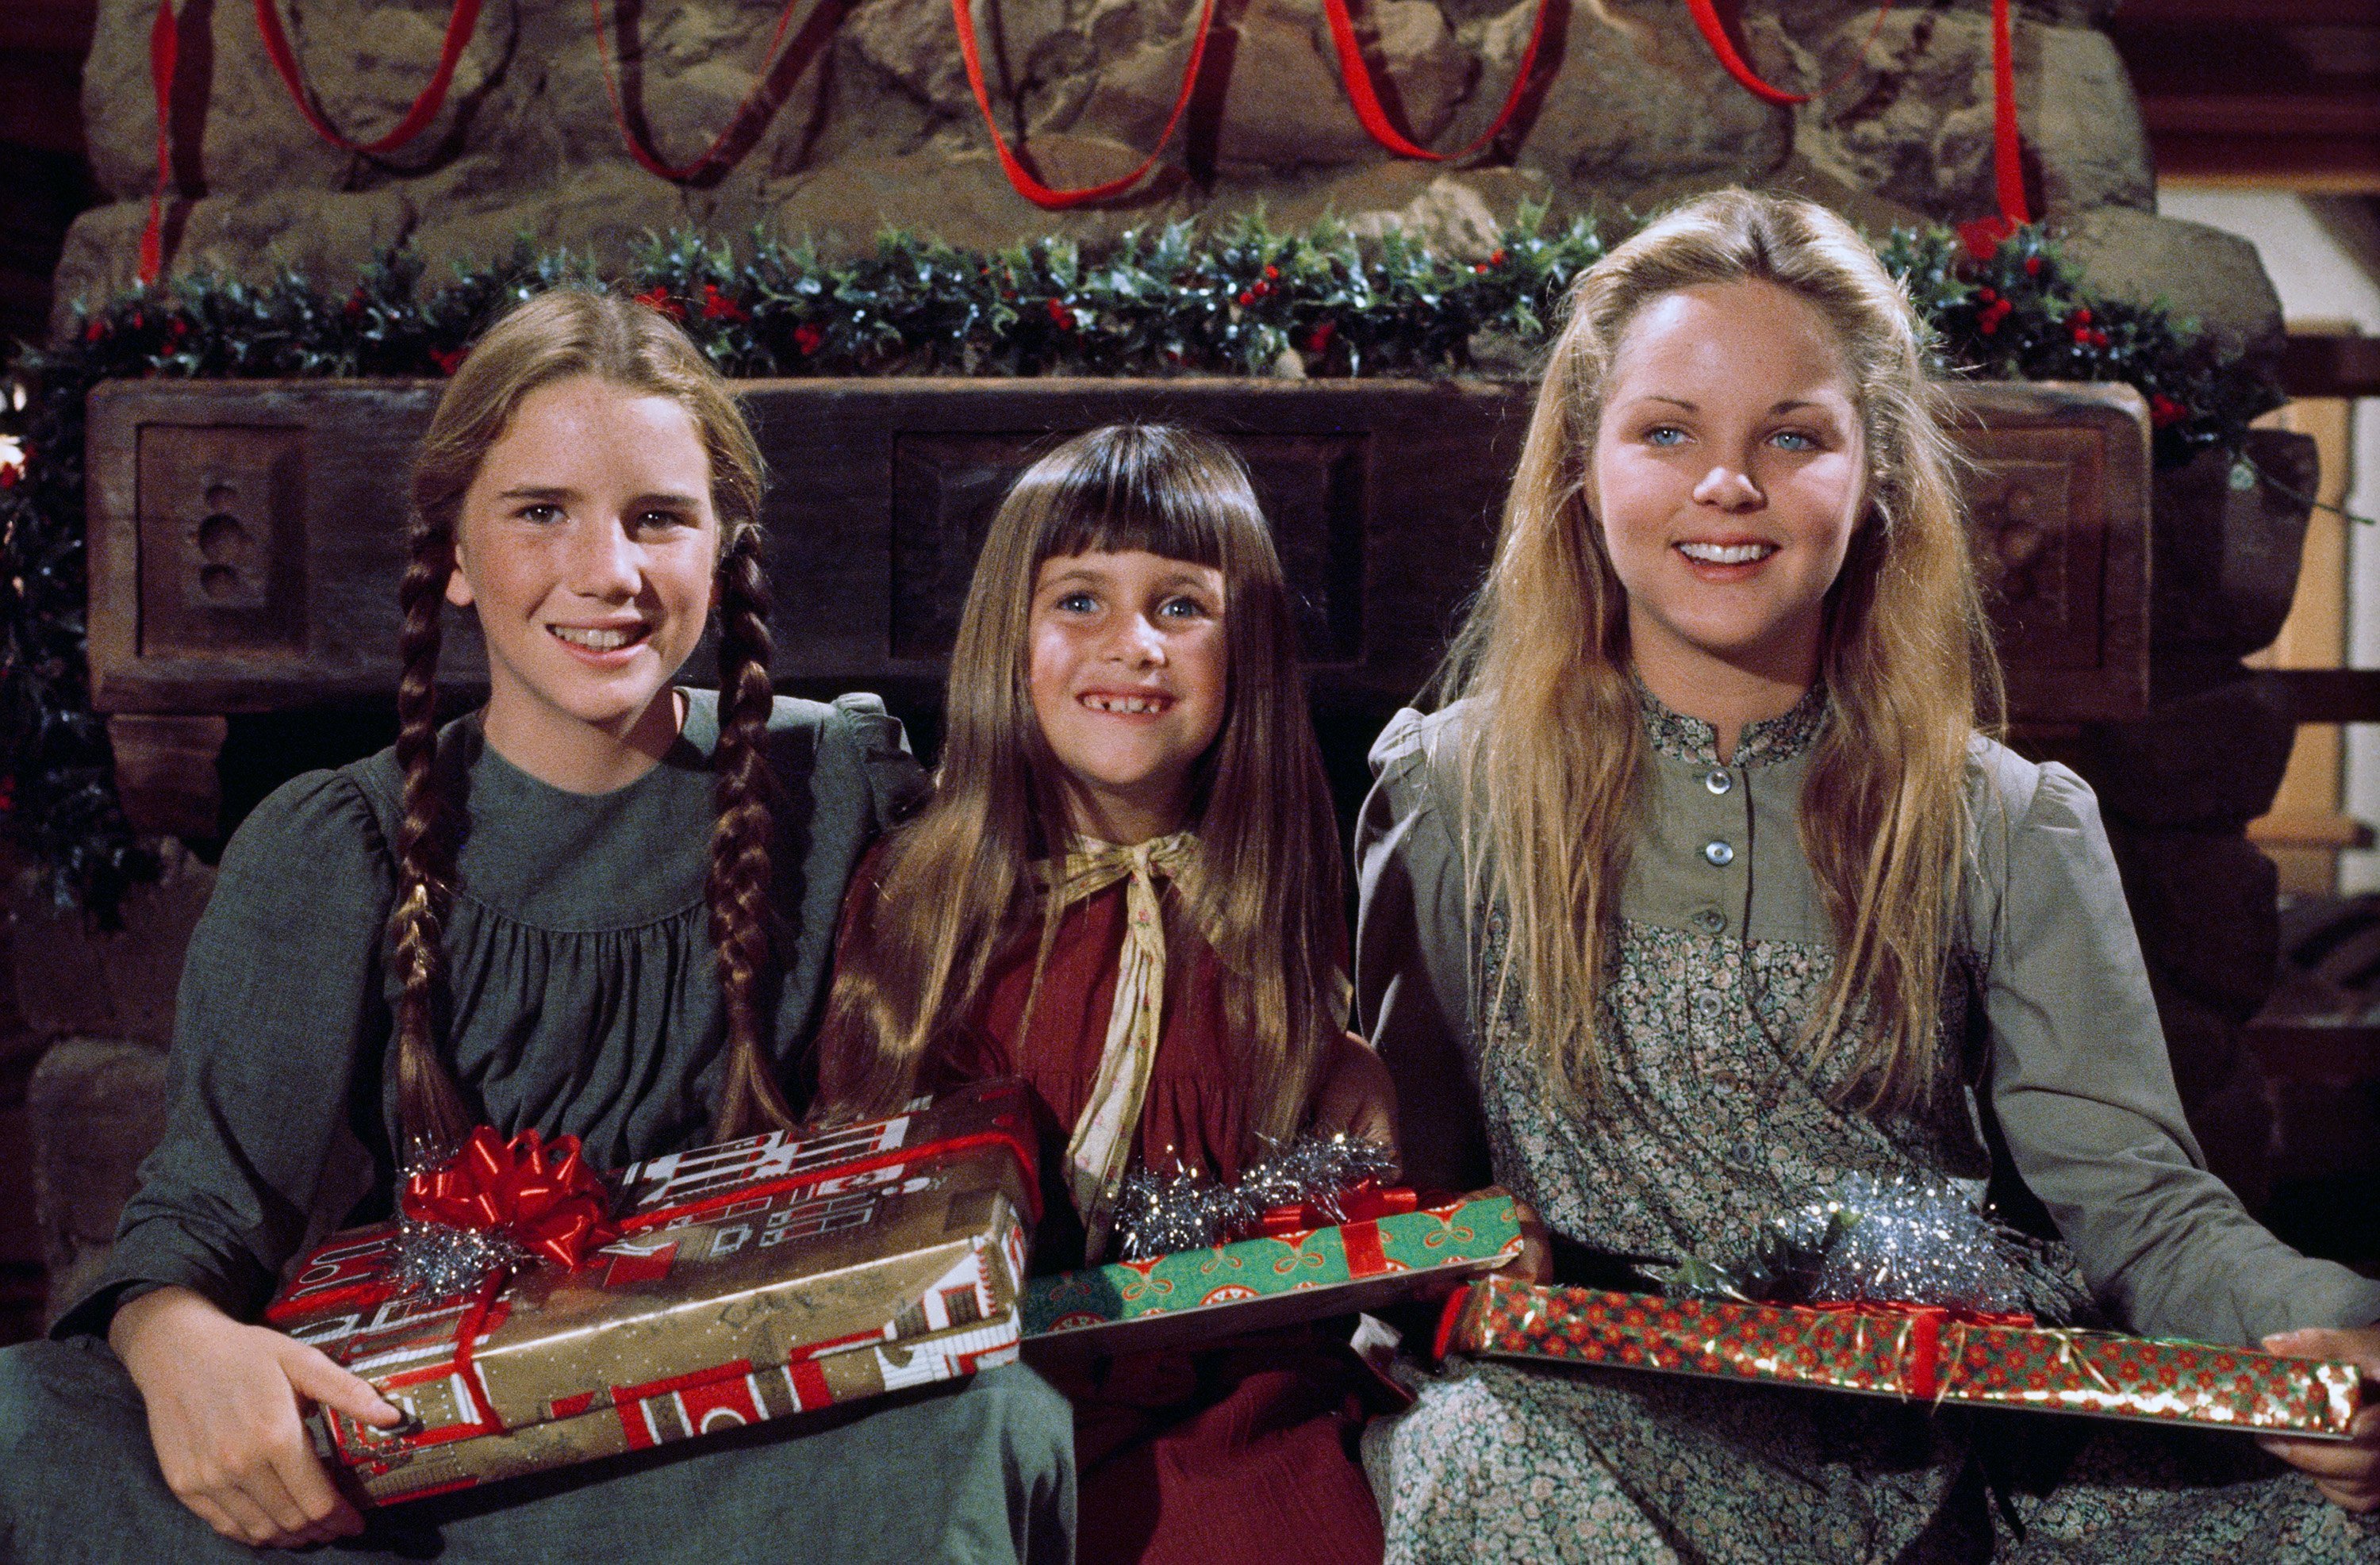 Melissa Gilbert as Laura Elizabeth Ingalls Wilder, Lindsay or Sydney Greenbush as Carrie Ingalls, Melisssa Sue Anderson as Mary Ingalls Kendall in 'Little House on the Prairie'